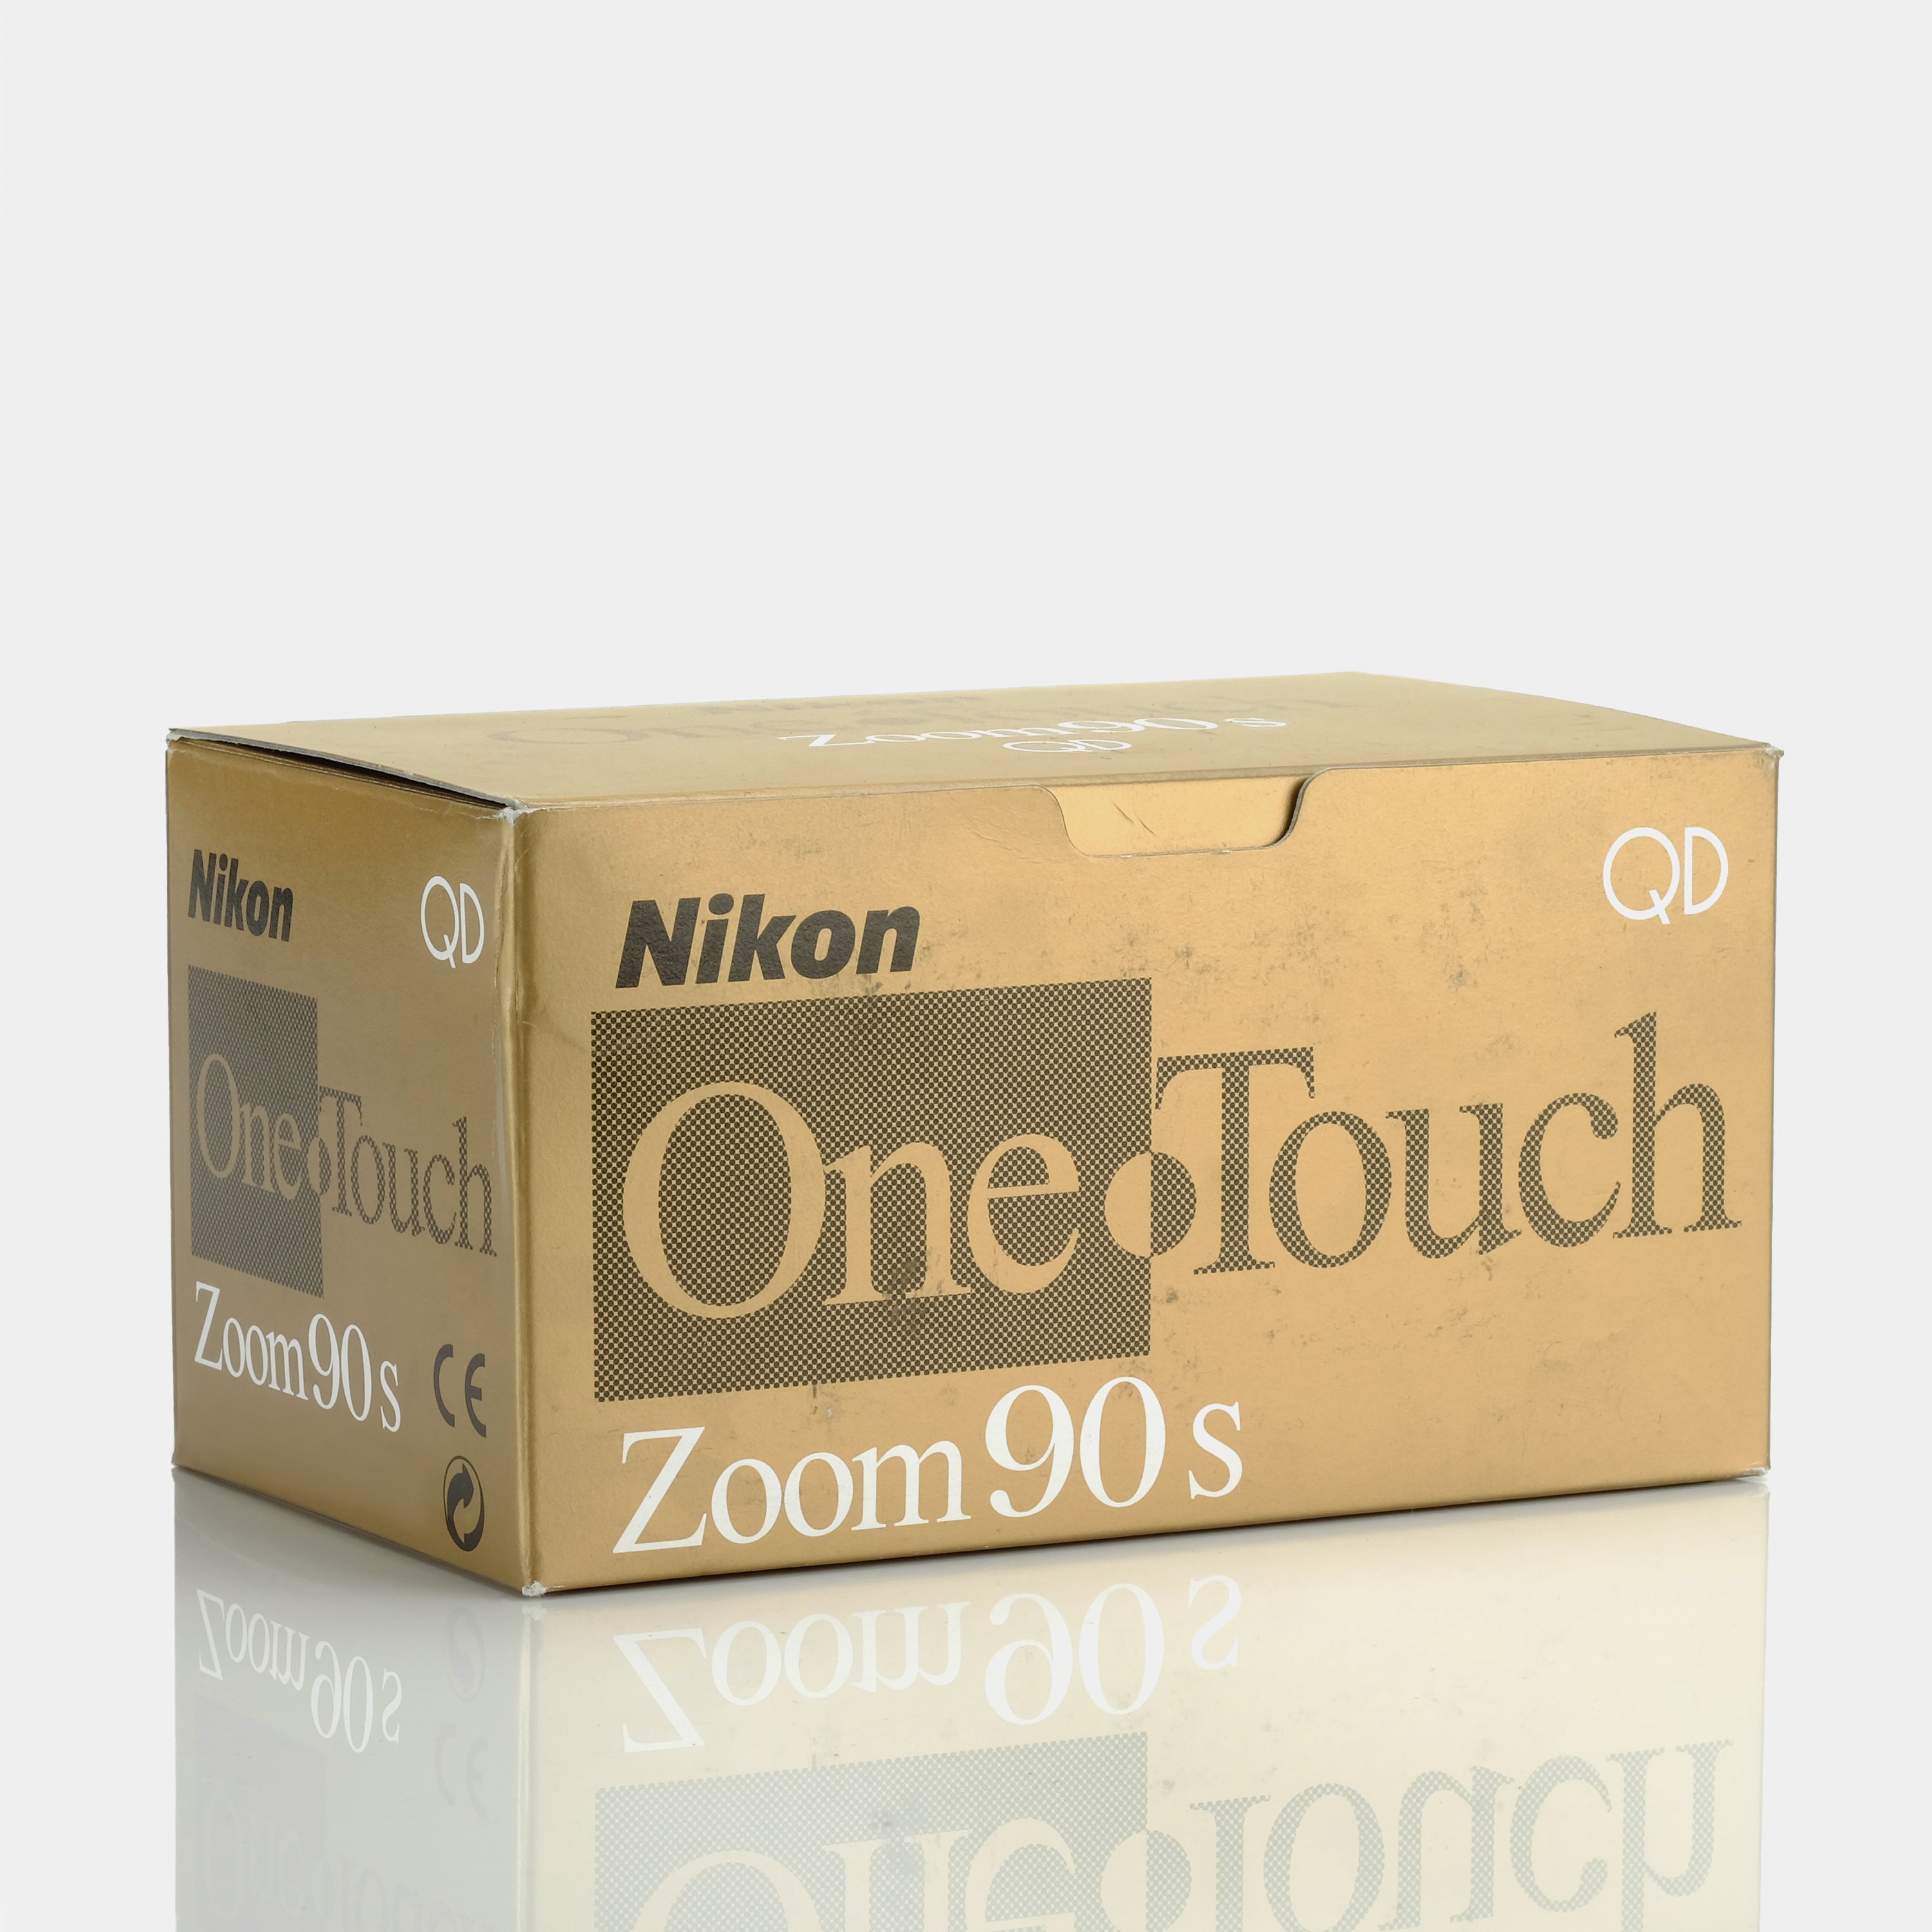 Nikon One Touch Zoom 90s 35mm Point and Shoot Film Camera (New Old Stock)